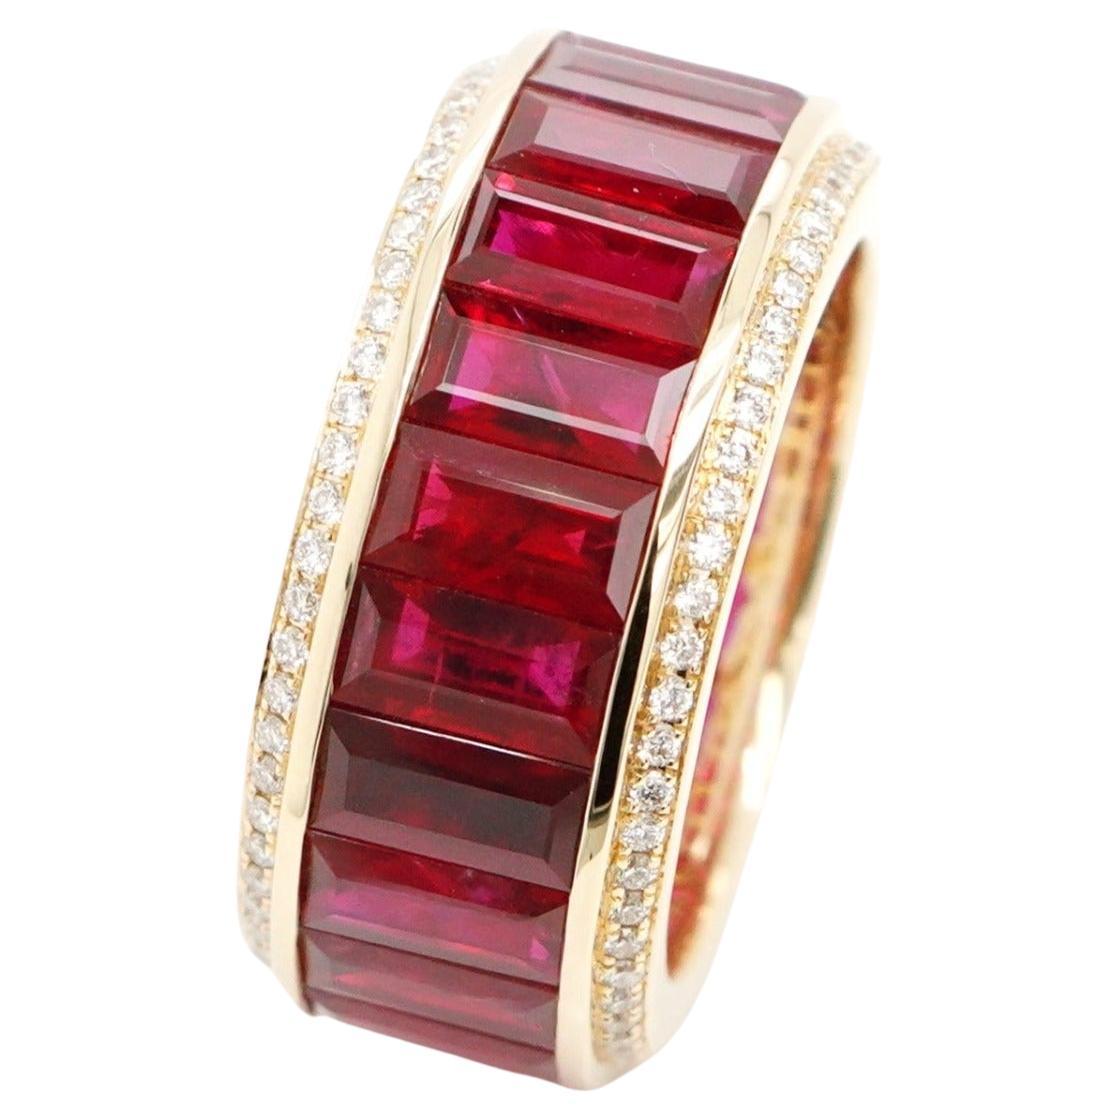 BENJAMIN FINE JEWELRY 9.14 cts Baguette Ruby 18K Eternity Band Ring